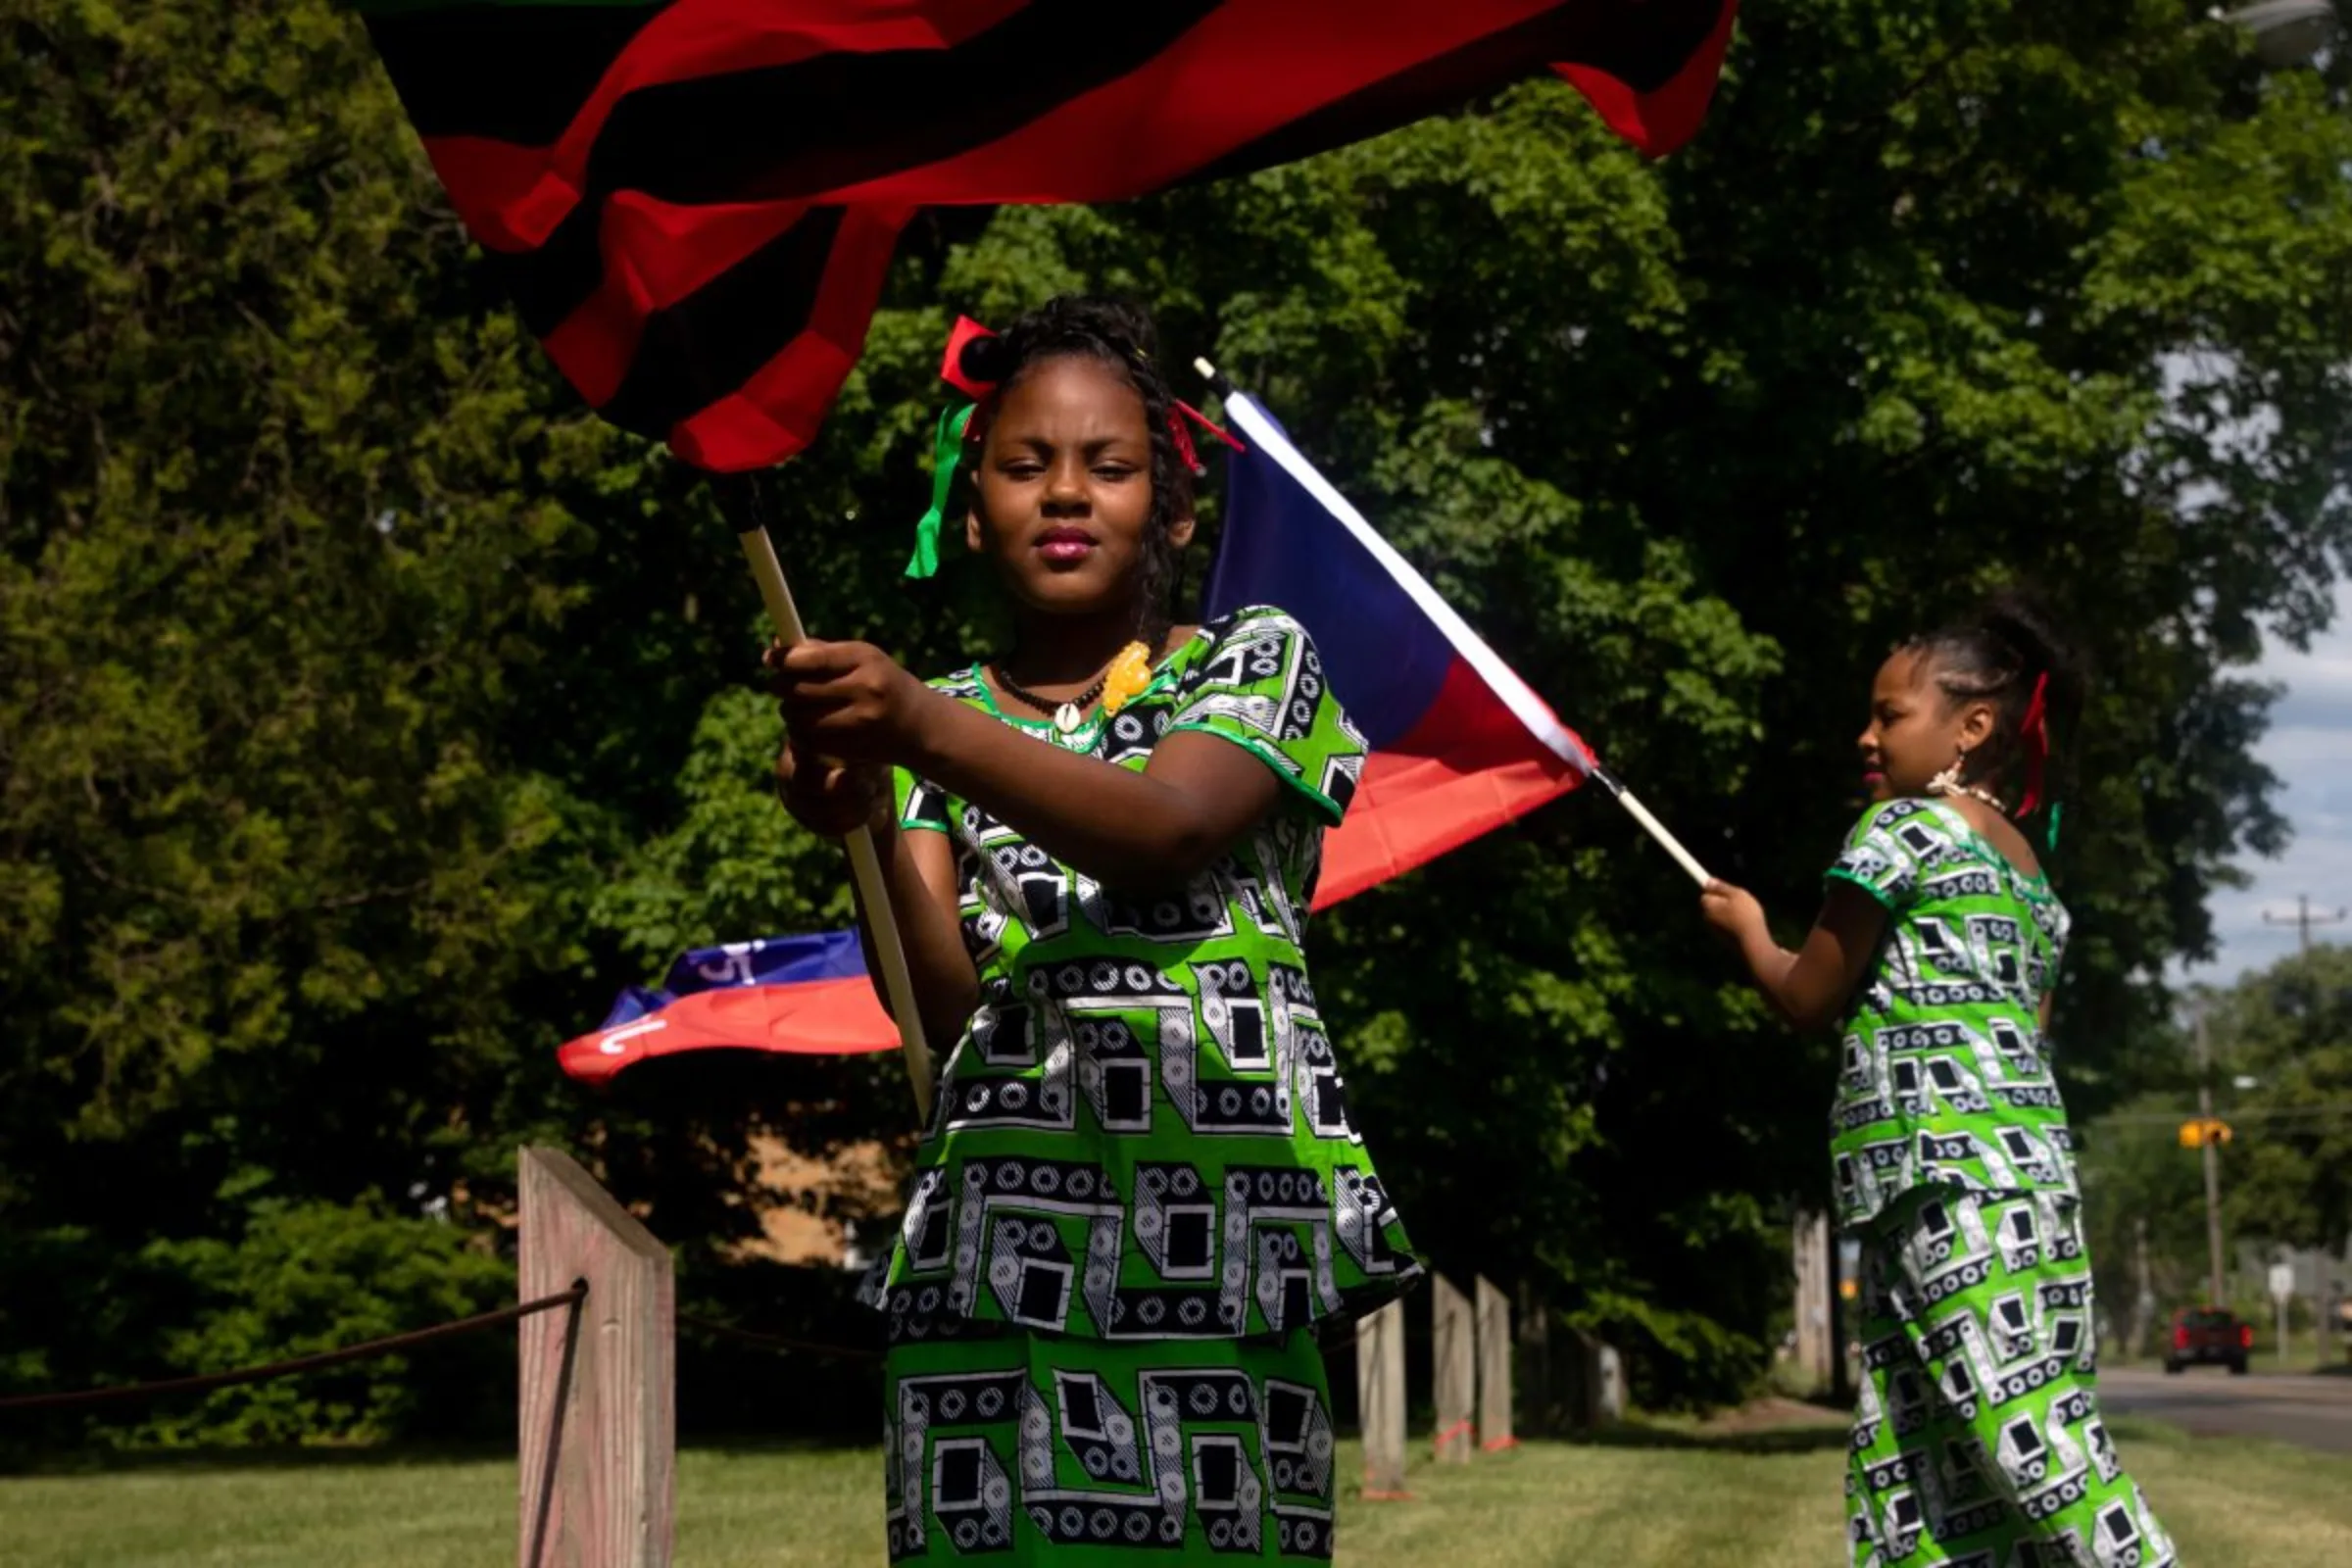 People celebrate Juneteenth, which commemorates the end of slavery in Texas, two years after the 1863 Emancipation Proclamation freed slaves elsewhere in the United States, in Flint, Michigan, U.S., June 19, 2021